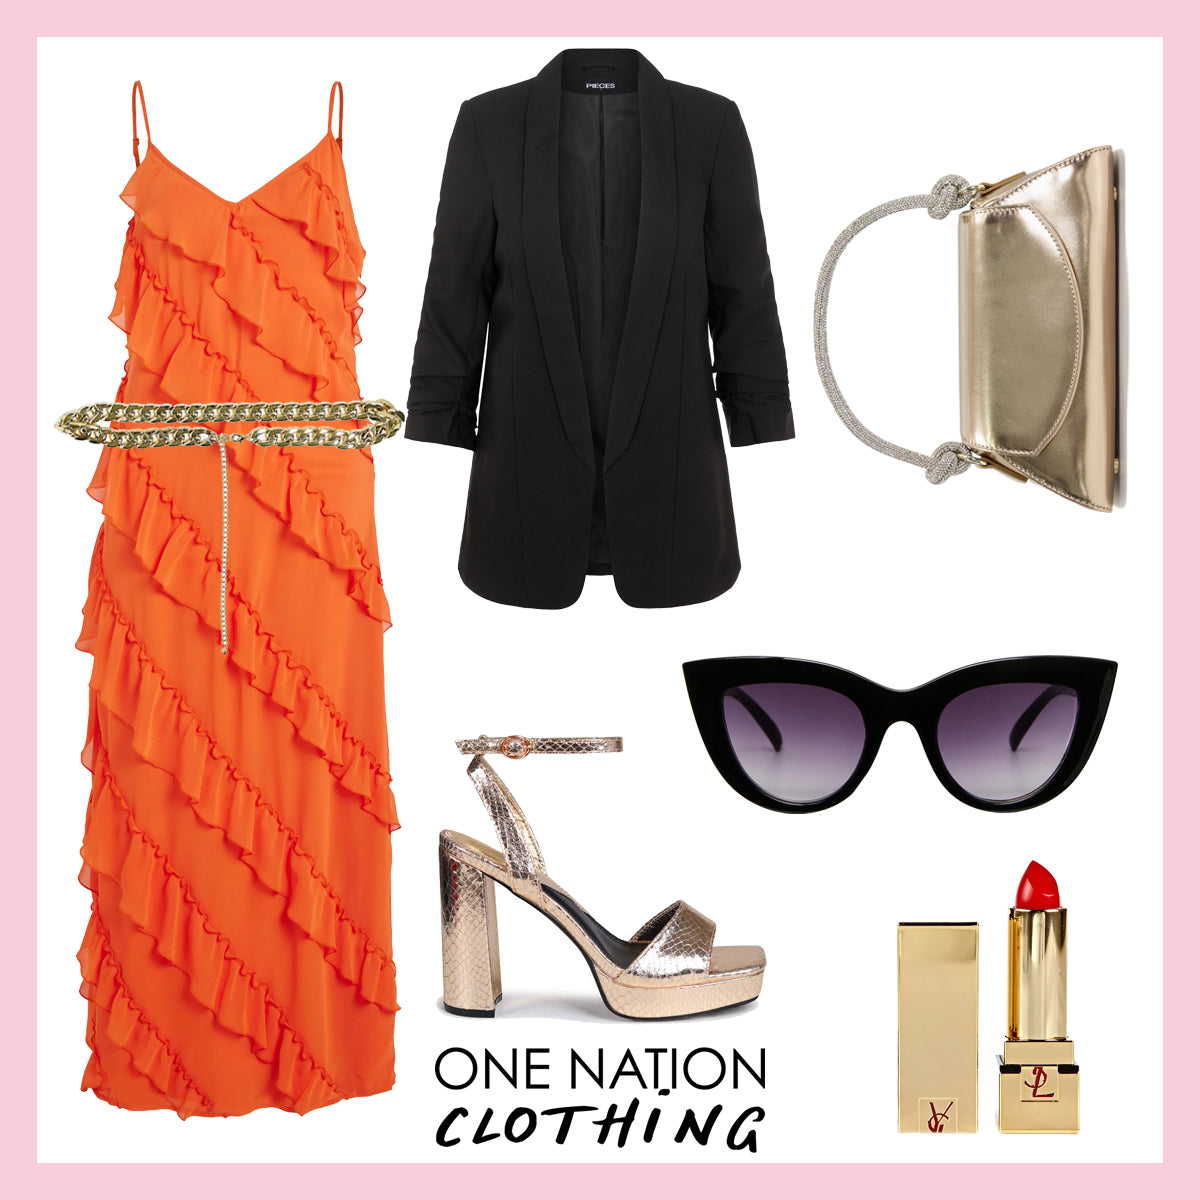 OUTFIT INSPO: Occasion Wear - The Neila Dress